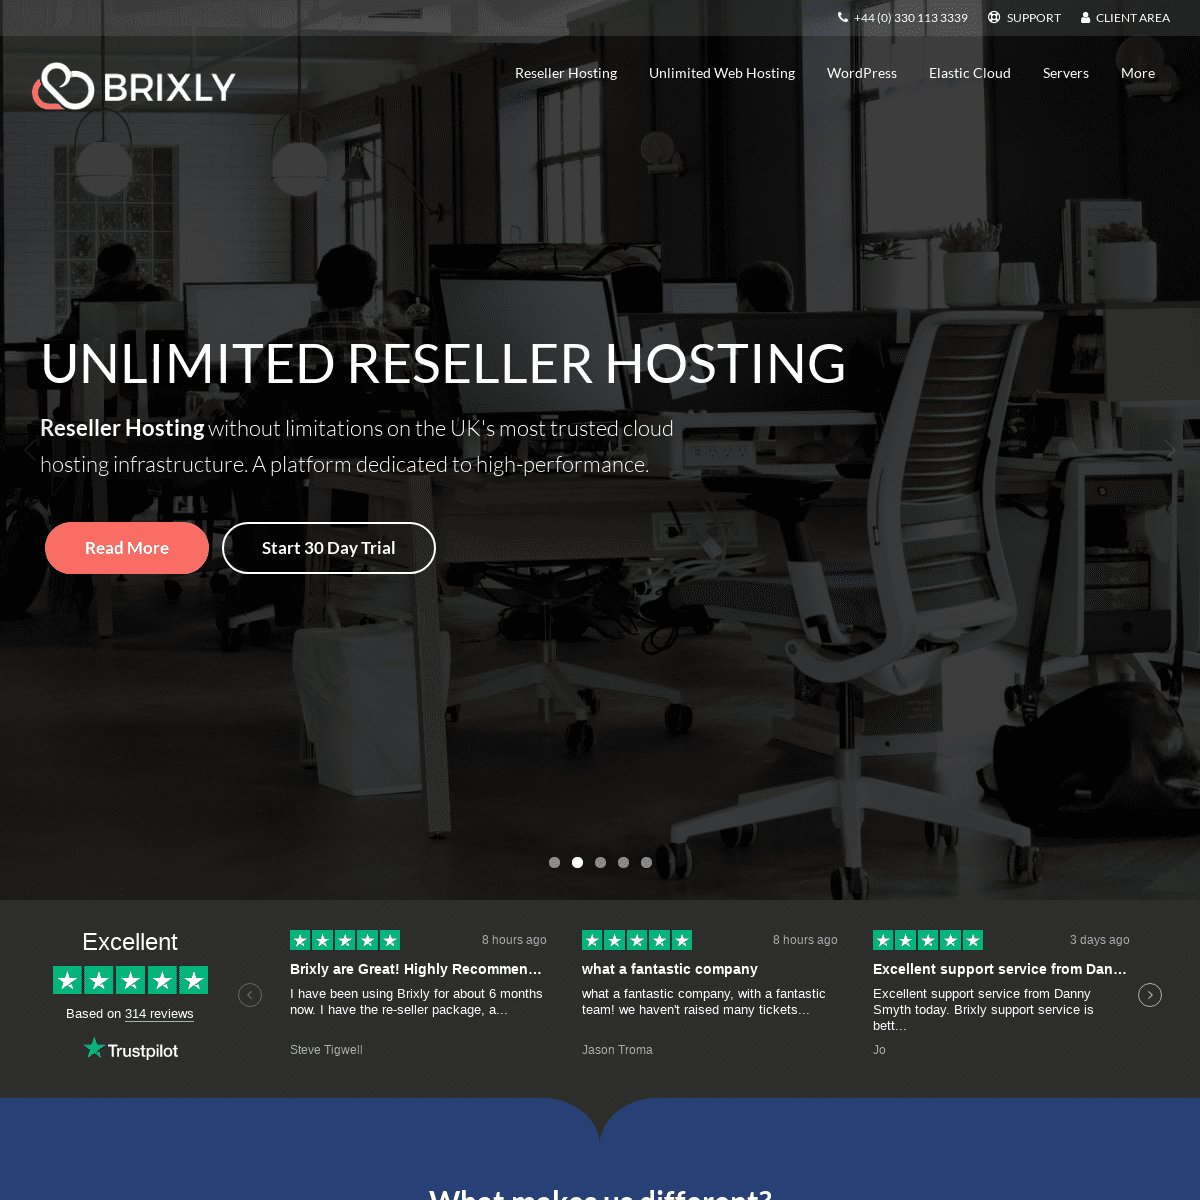 Brixly – Unlimited Reseller Hosting, Unlimited Web Hosting and VPS